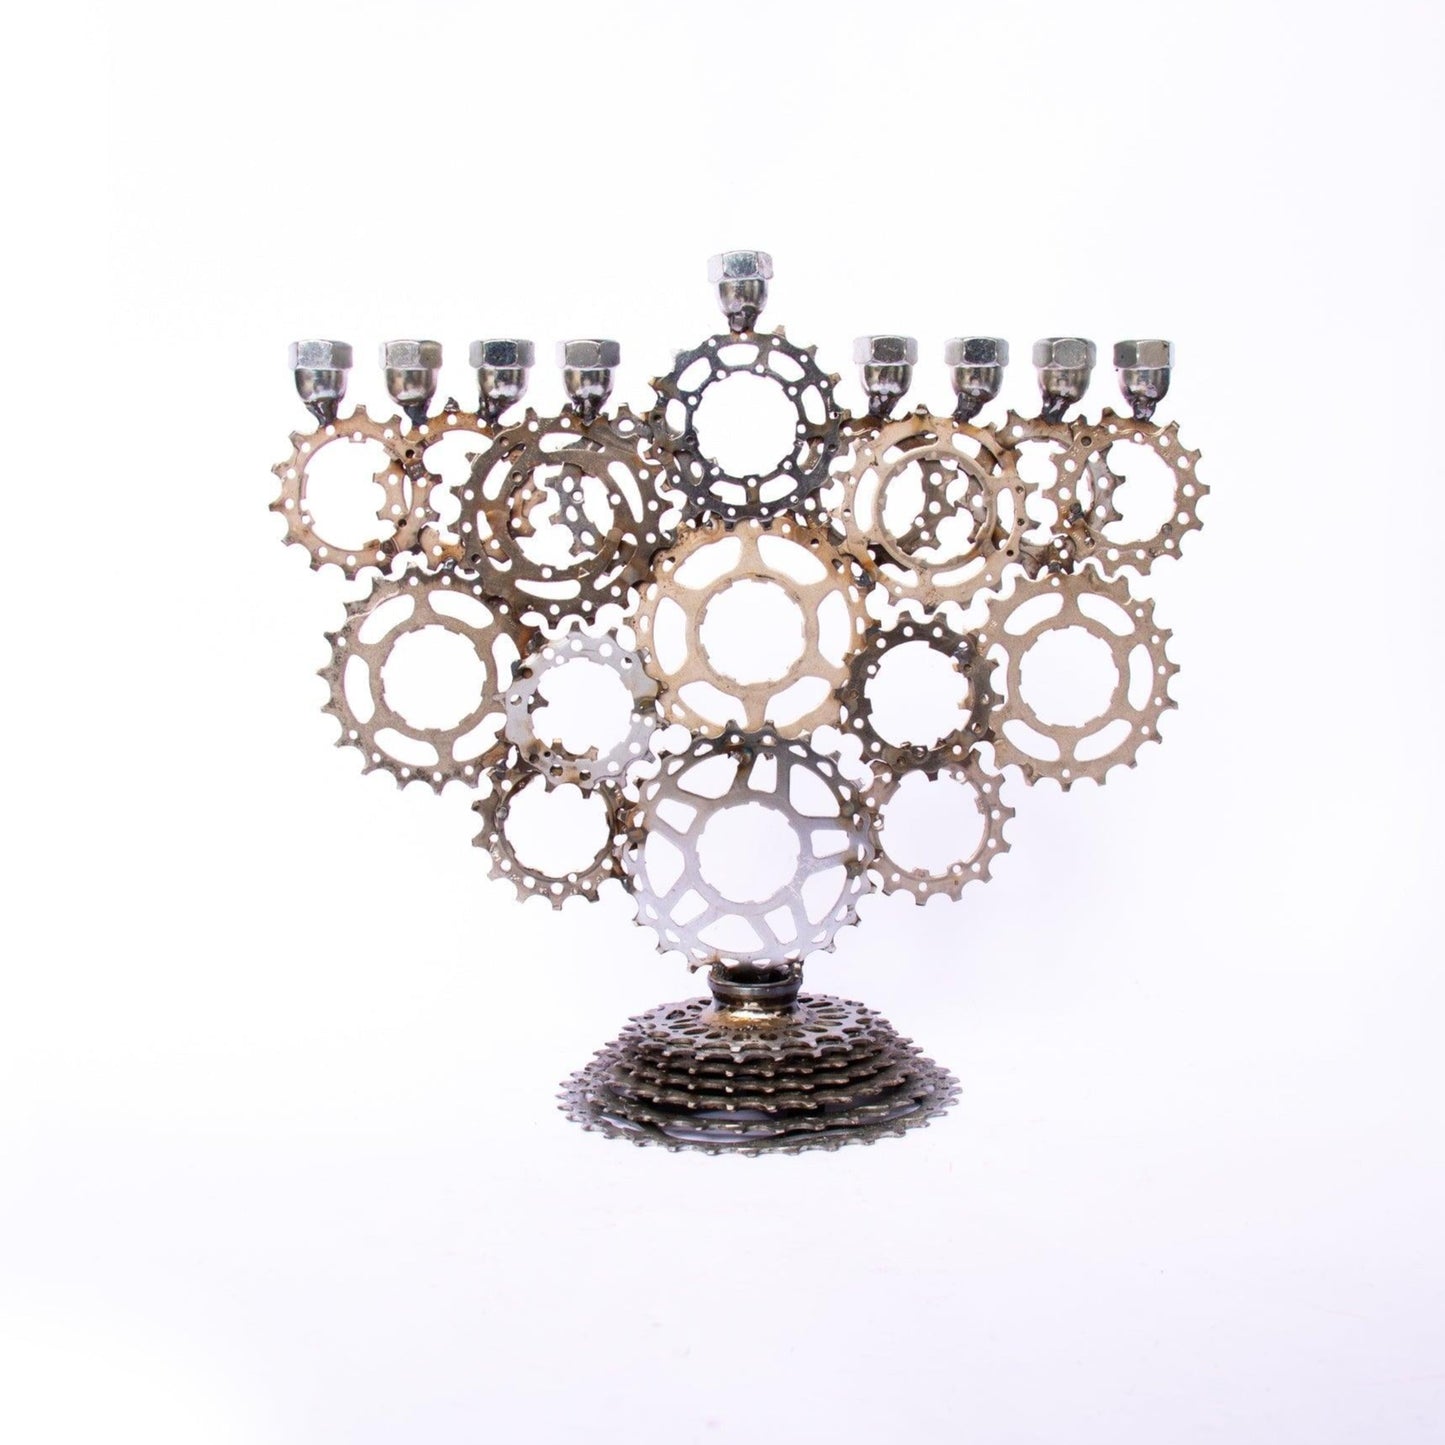 Sara Small - Menorah sculpture, made of bicycle parts | UNCHAINED by NIRIT LEVAV PACKER